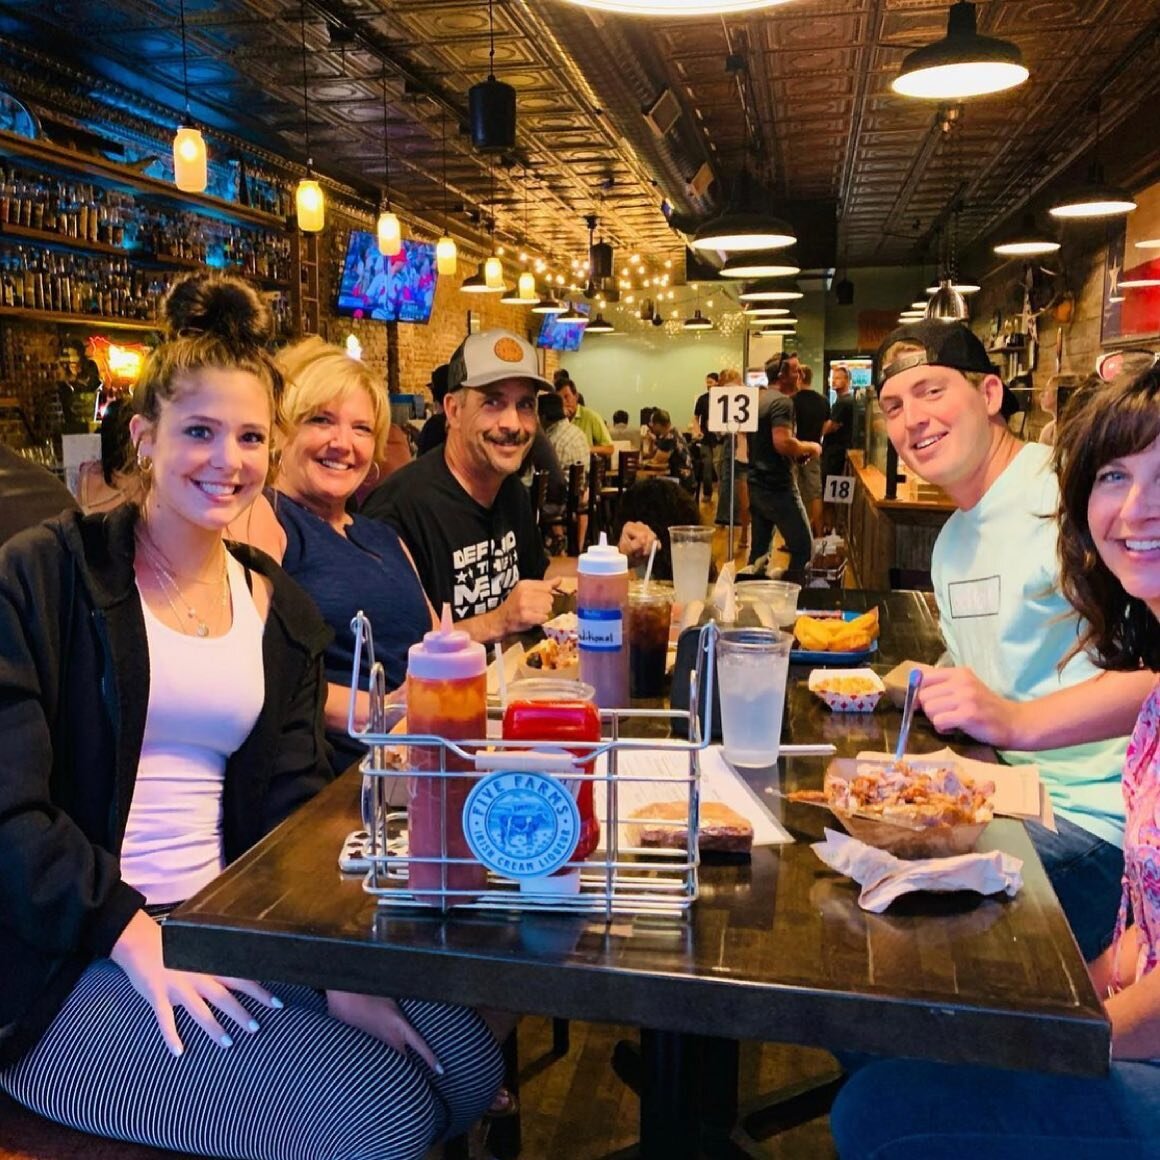 What is better than BBQ at bringing friends and family together on the weekend? Stop by today for some burnt ends (Friday special) and $3 off all whiskey flights! 👍🥃&thinsp;
&thinsp;
📸: Moekno &thinsp;
&thinsp;
&thinsp;
#postoakbarbecue #burntends